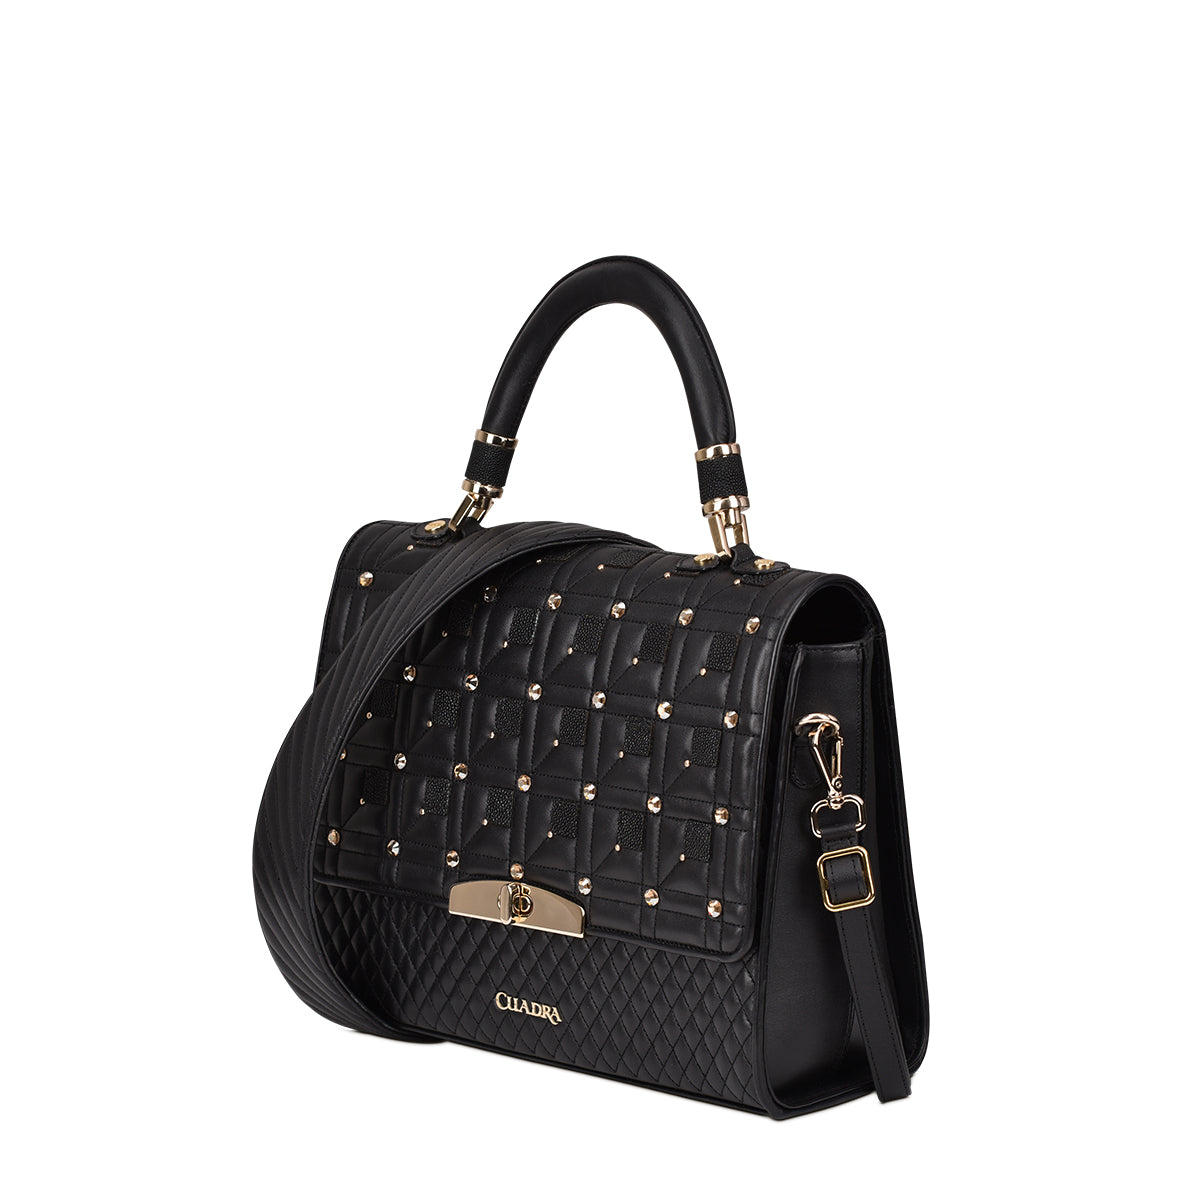 the leather bag has a secure closure with a sturdy metal clasp and magnets